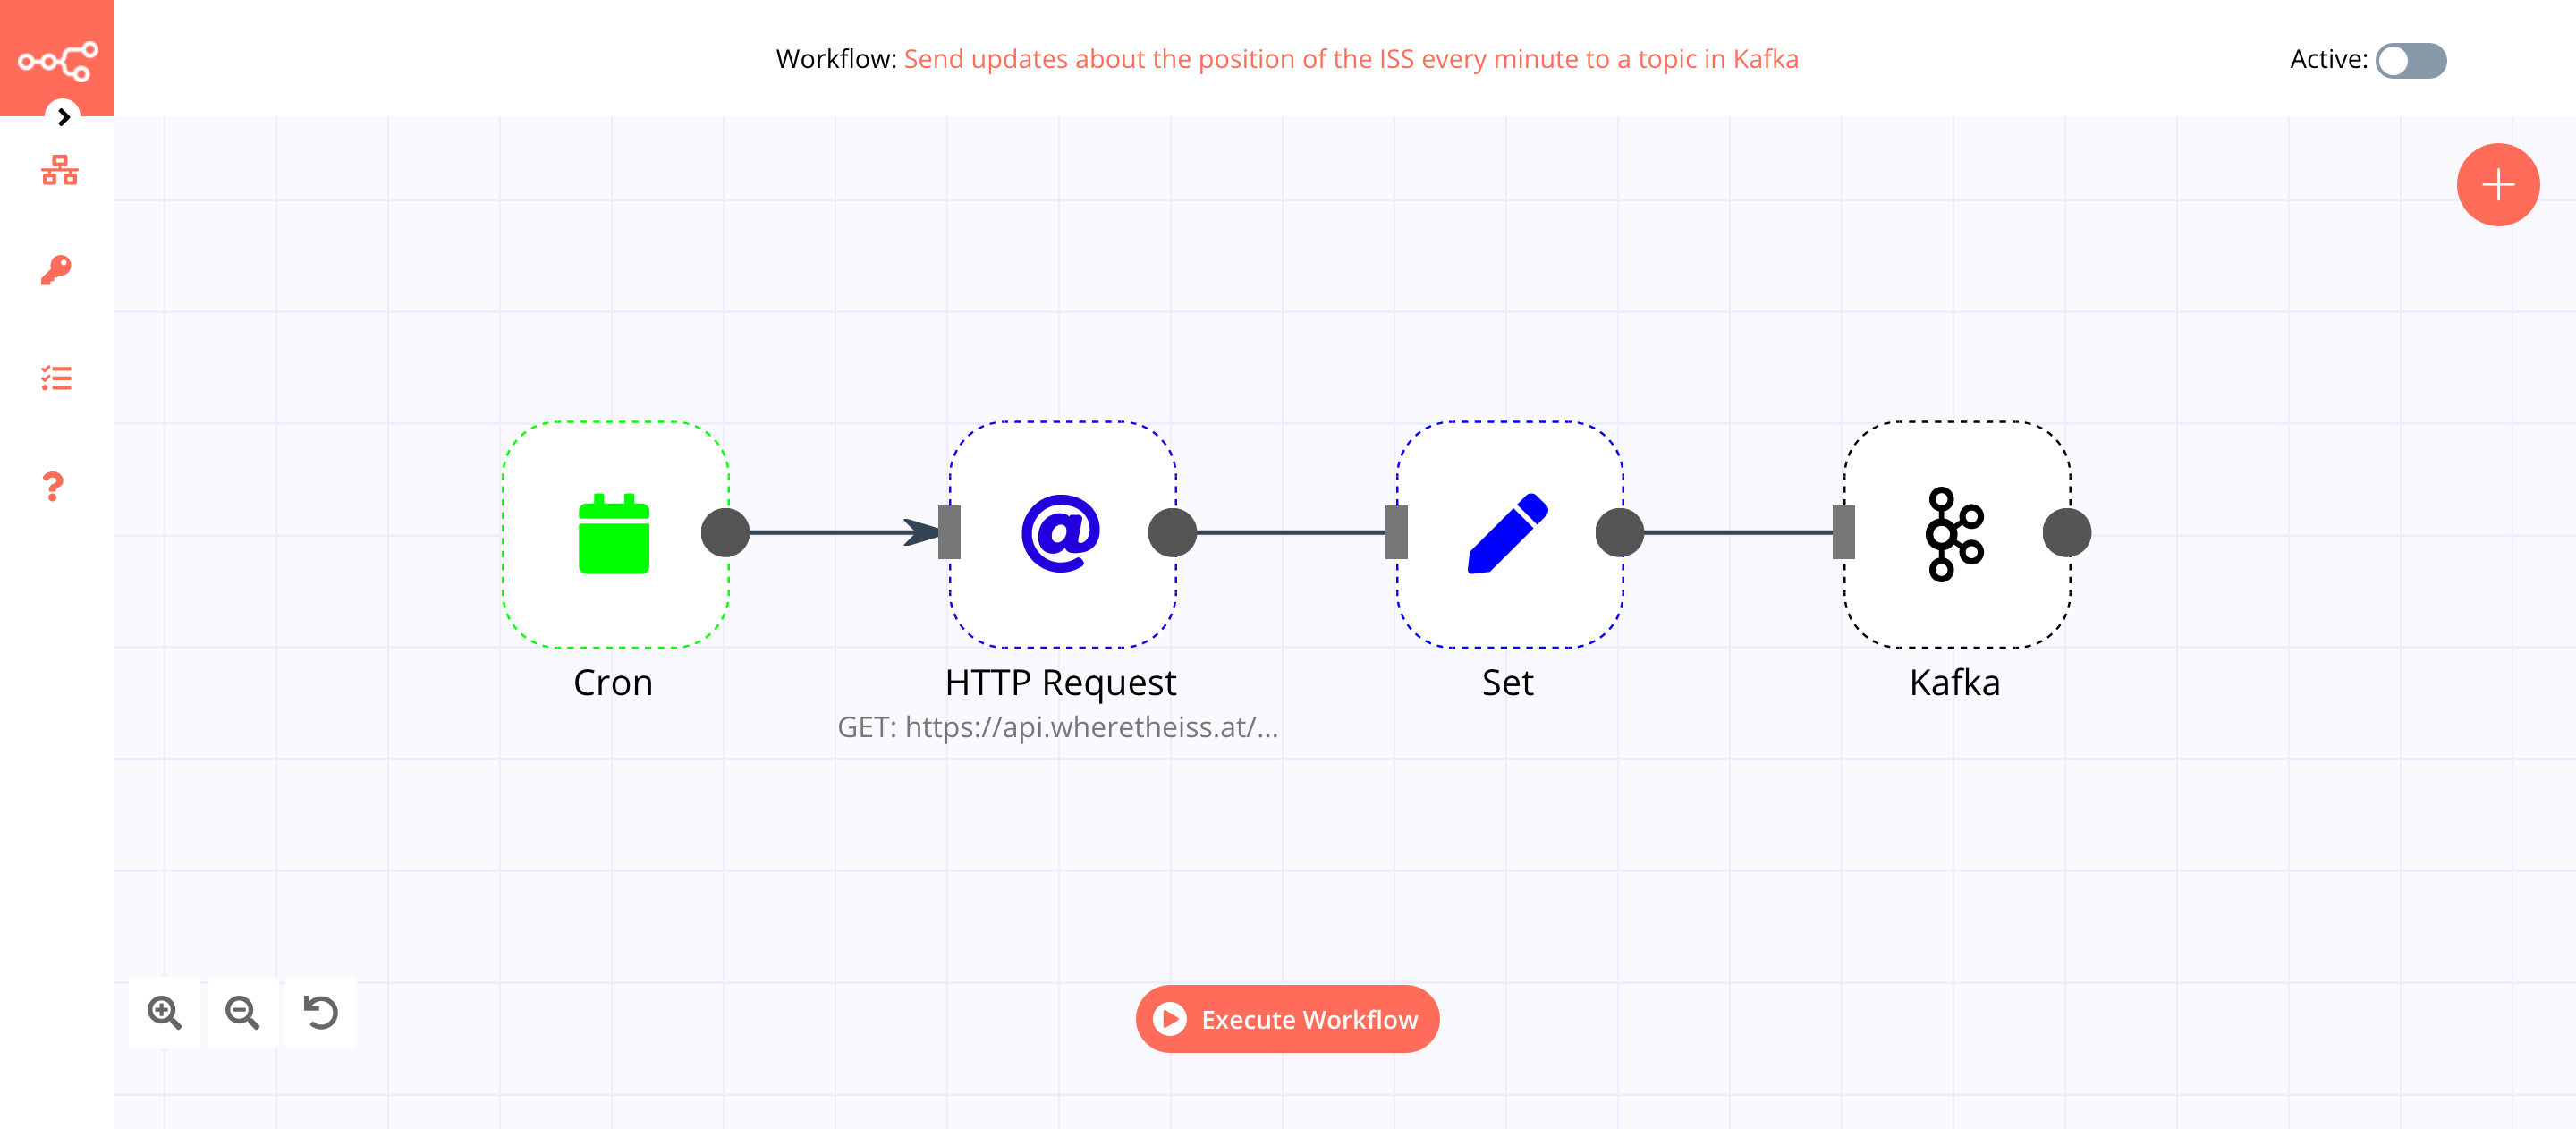 A workflow with the Kafka node